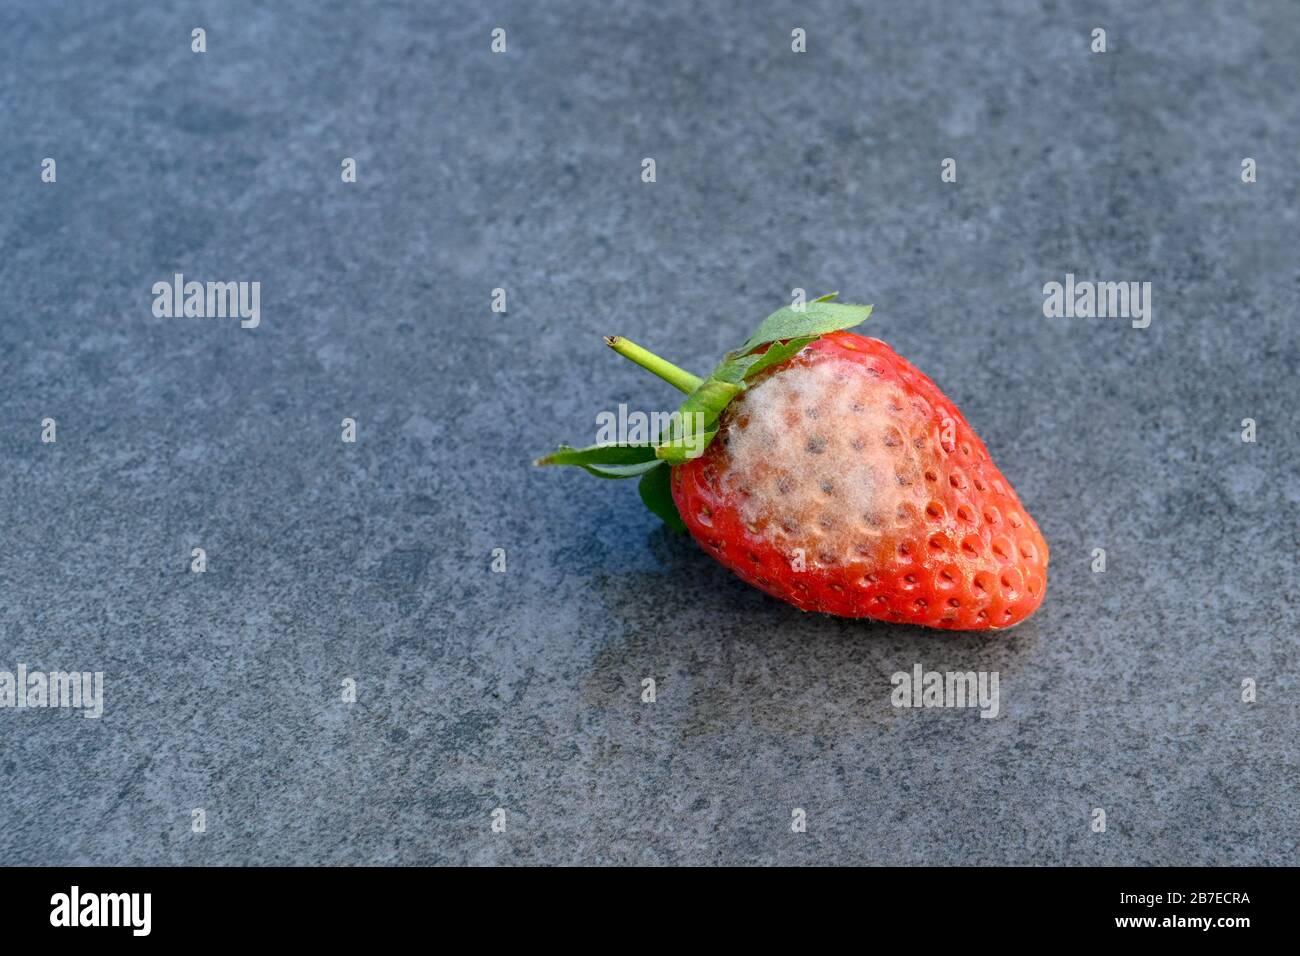 Close up view of a single strawberry with mould growing on the surface isolated against a plain grey background, Space for copy left. Stock Photo